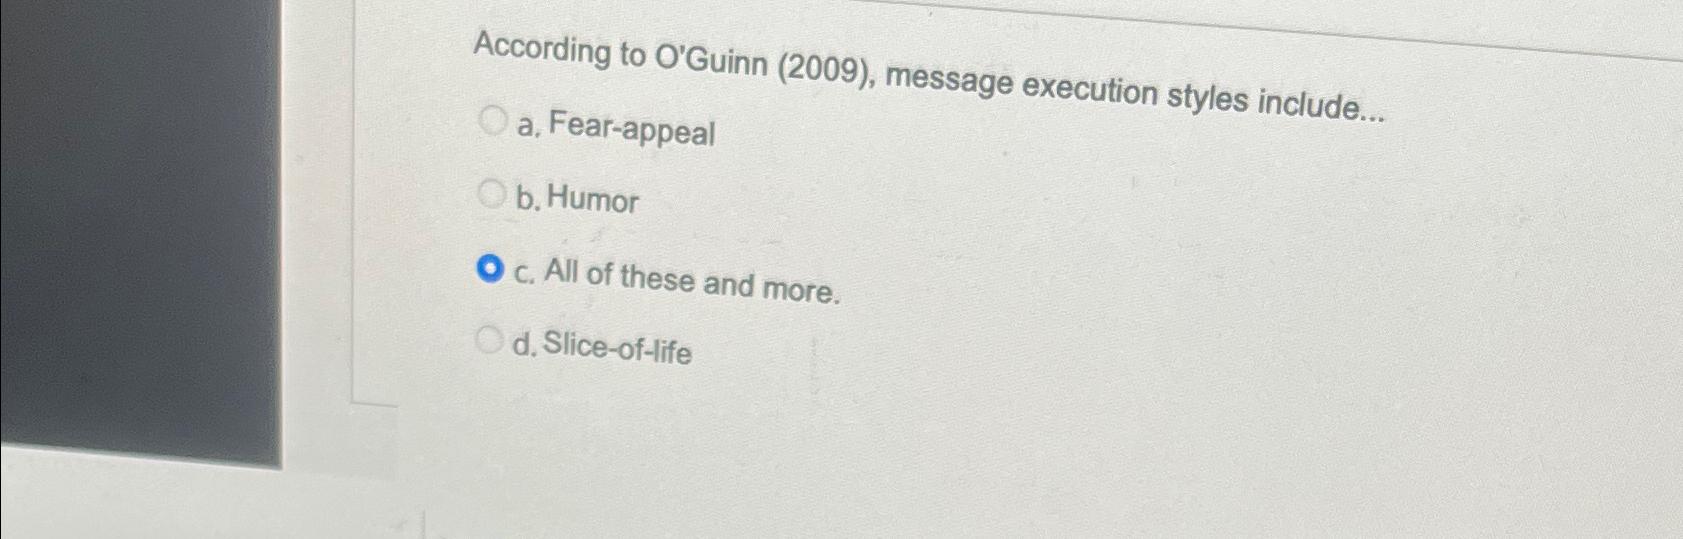 According to O'Guinn (2009), message execution styles include... Oa, Fear-appeal Ob. Humor O c. All of these